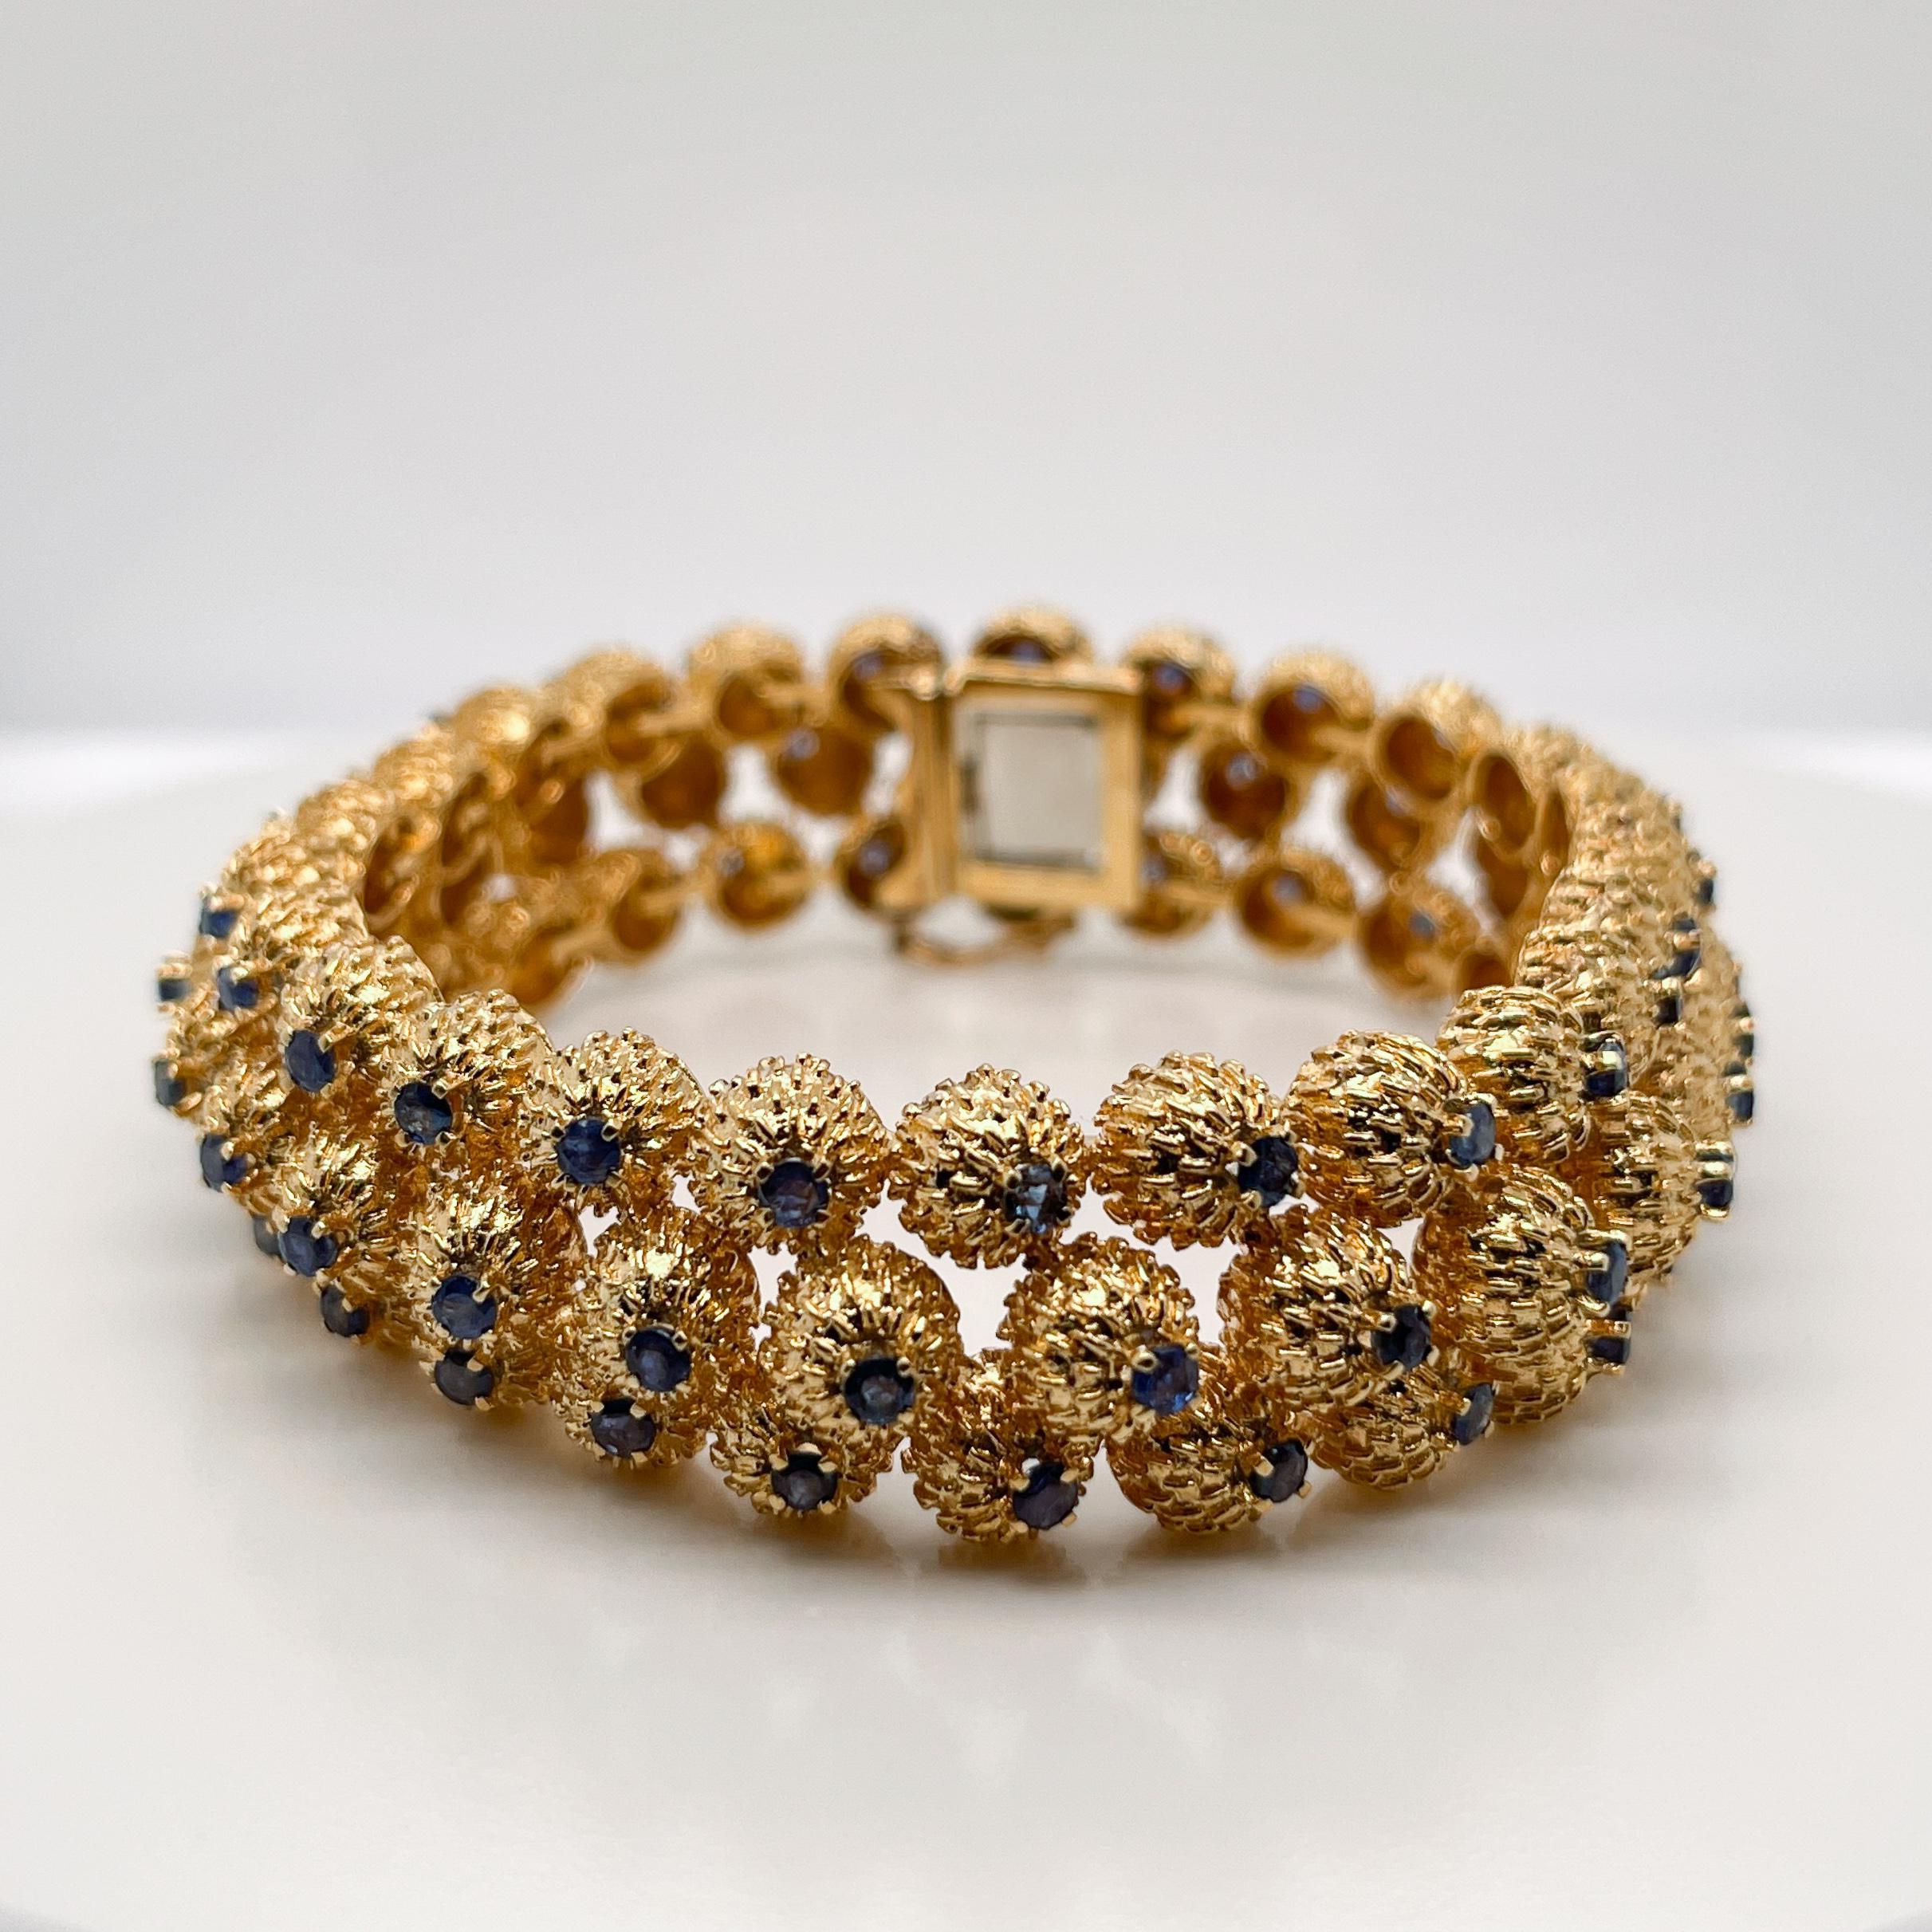 A fine gold and sapphire bracelet. 

By Tiffany & Co. 

With three rows of stylized thistle bud links prong set with round cut sapphires.

In the style of Jean Schlumberger.

Simply great Tiffany design!

Date:
20th Century

Overall Condition:
It is